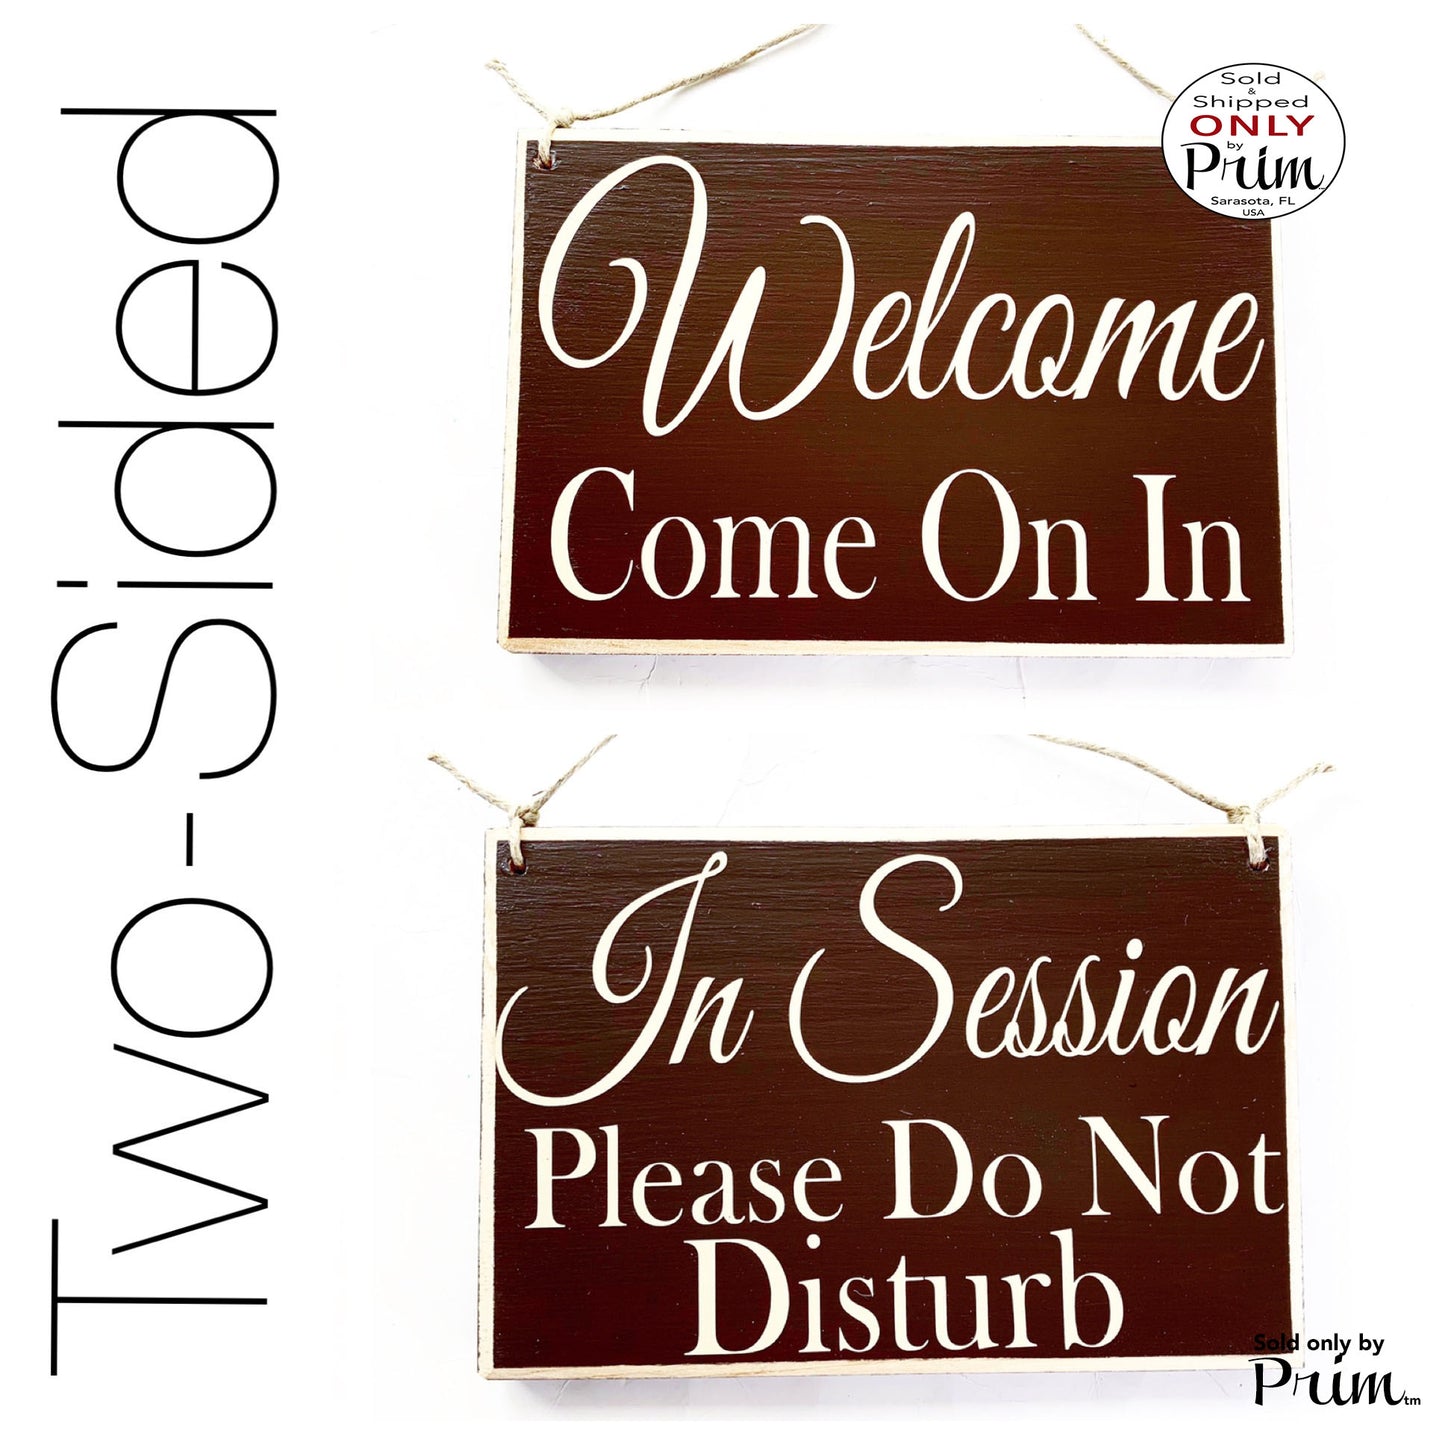 8x6 In Session Please Do Not Disturb Welcome Come on in Double Sided Custom Wood Sign Spa Salon Office In Progress Shhh Meeting Door Plaque